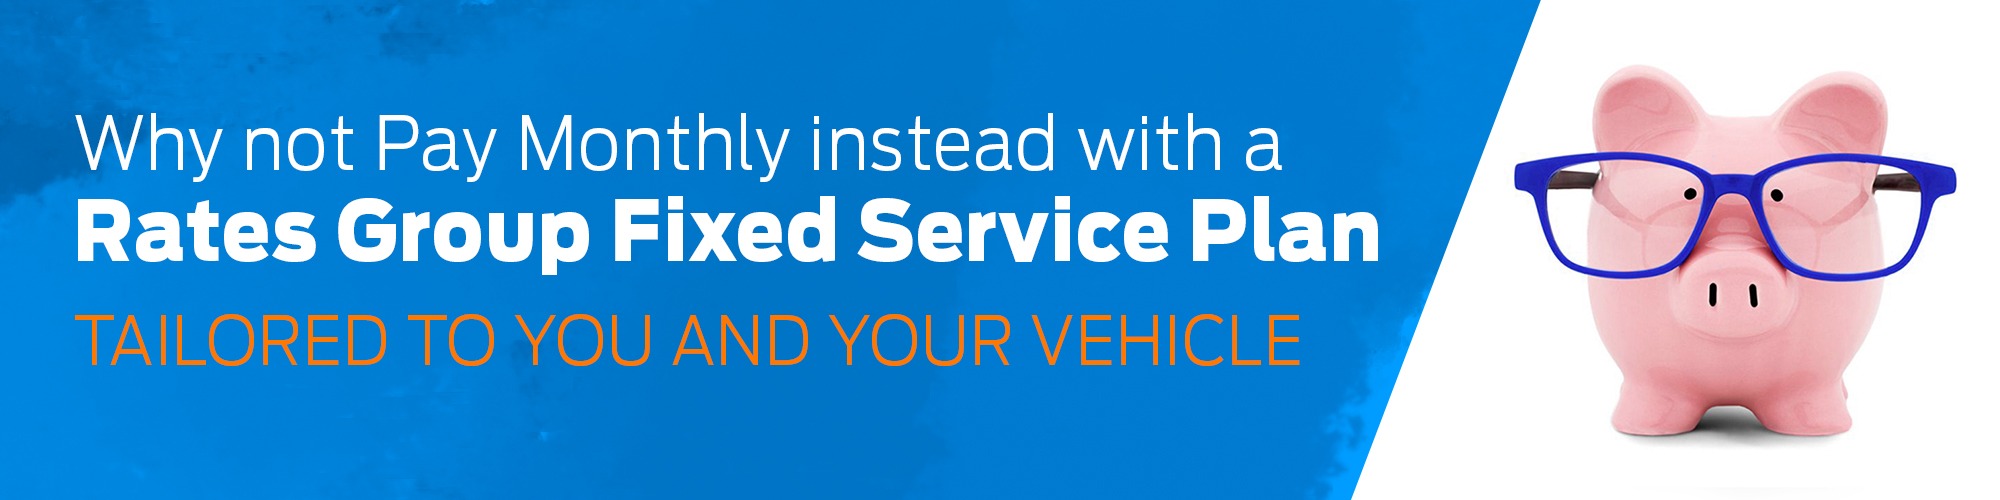 Rates Ford - Fixed Service Plans